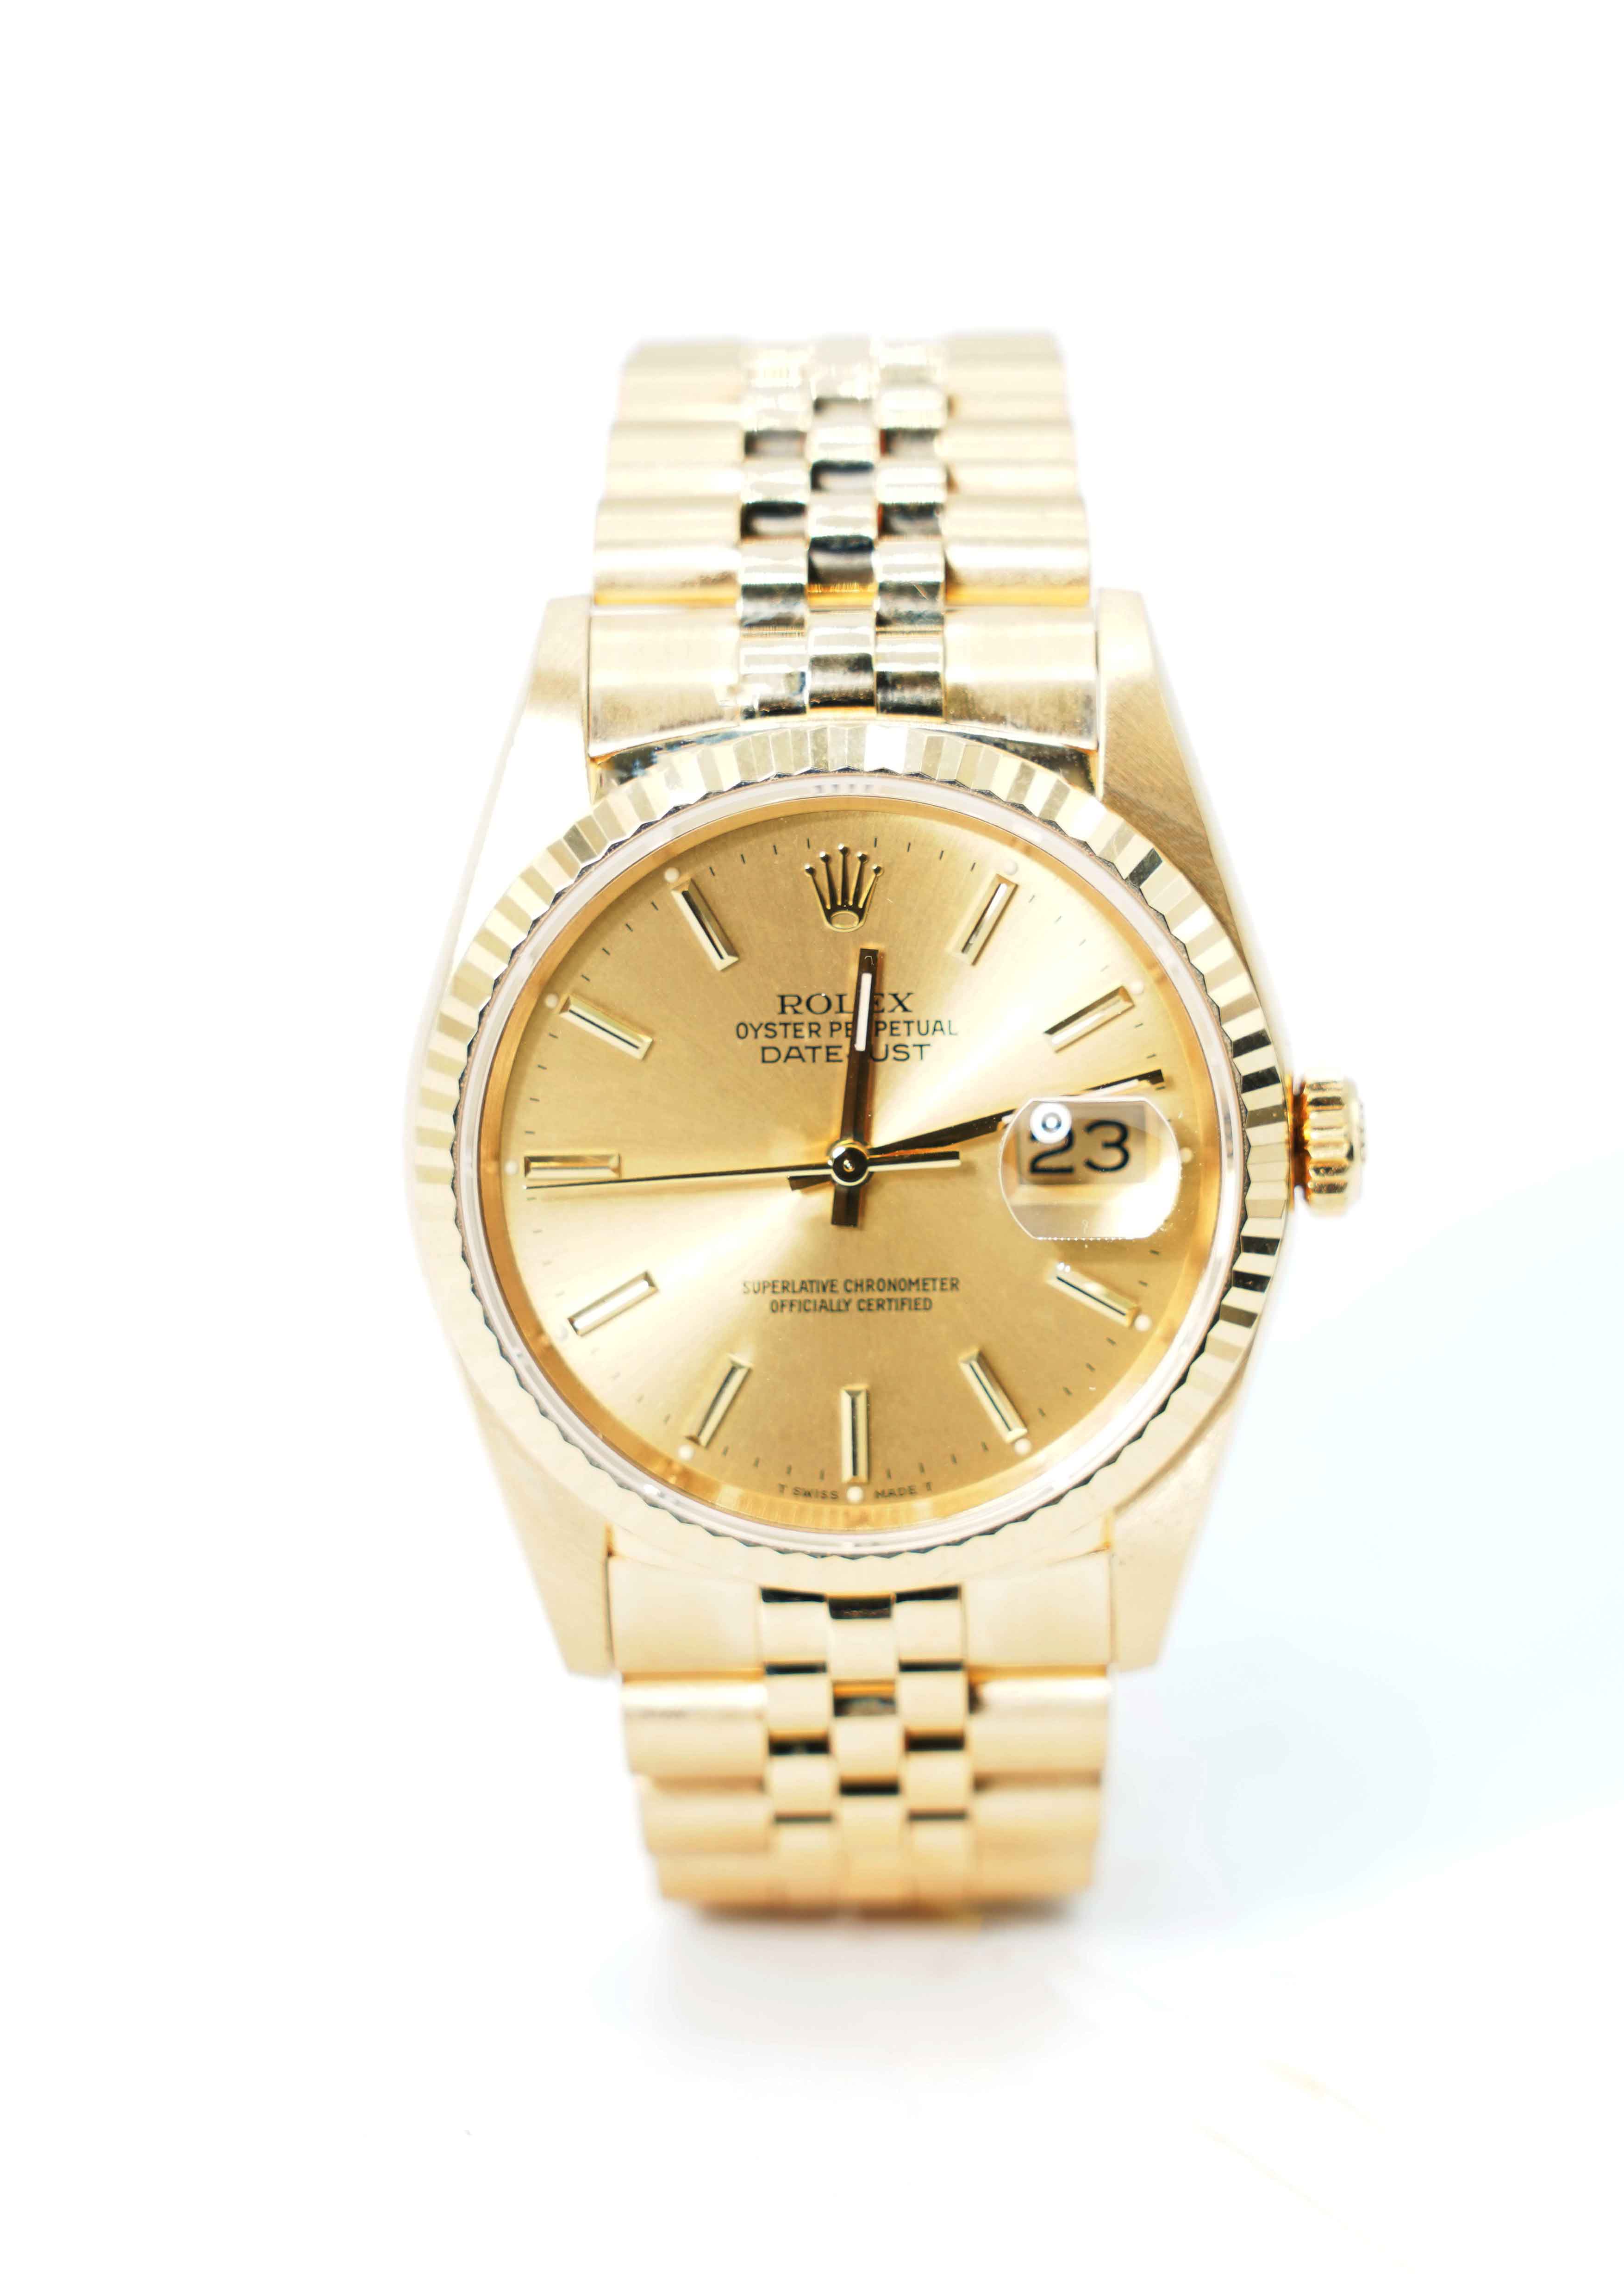 Rolex Datejust 36mm Champagne Dial 16238